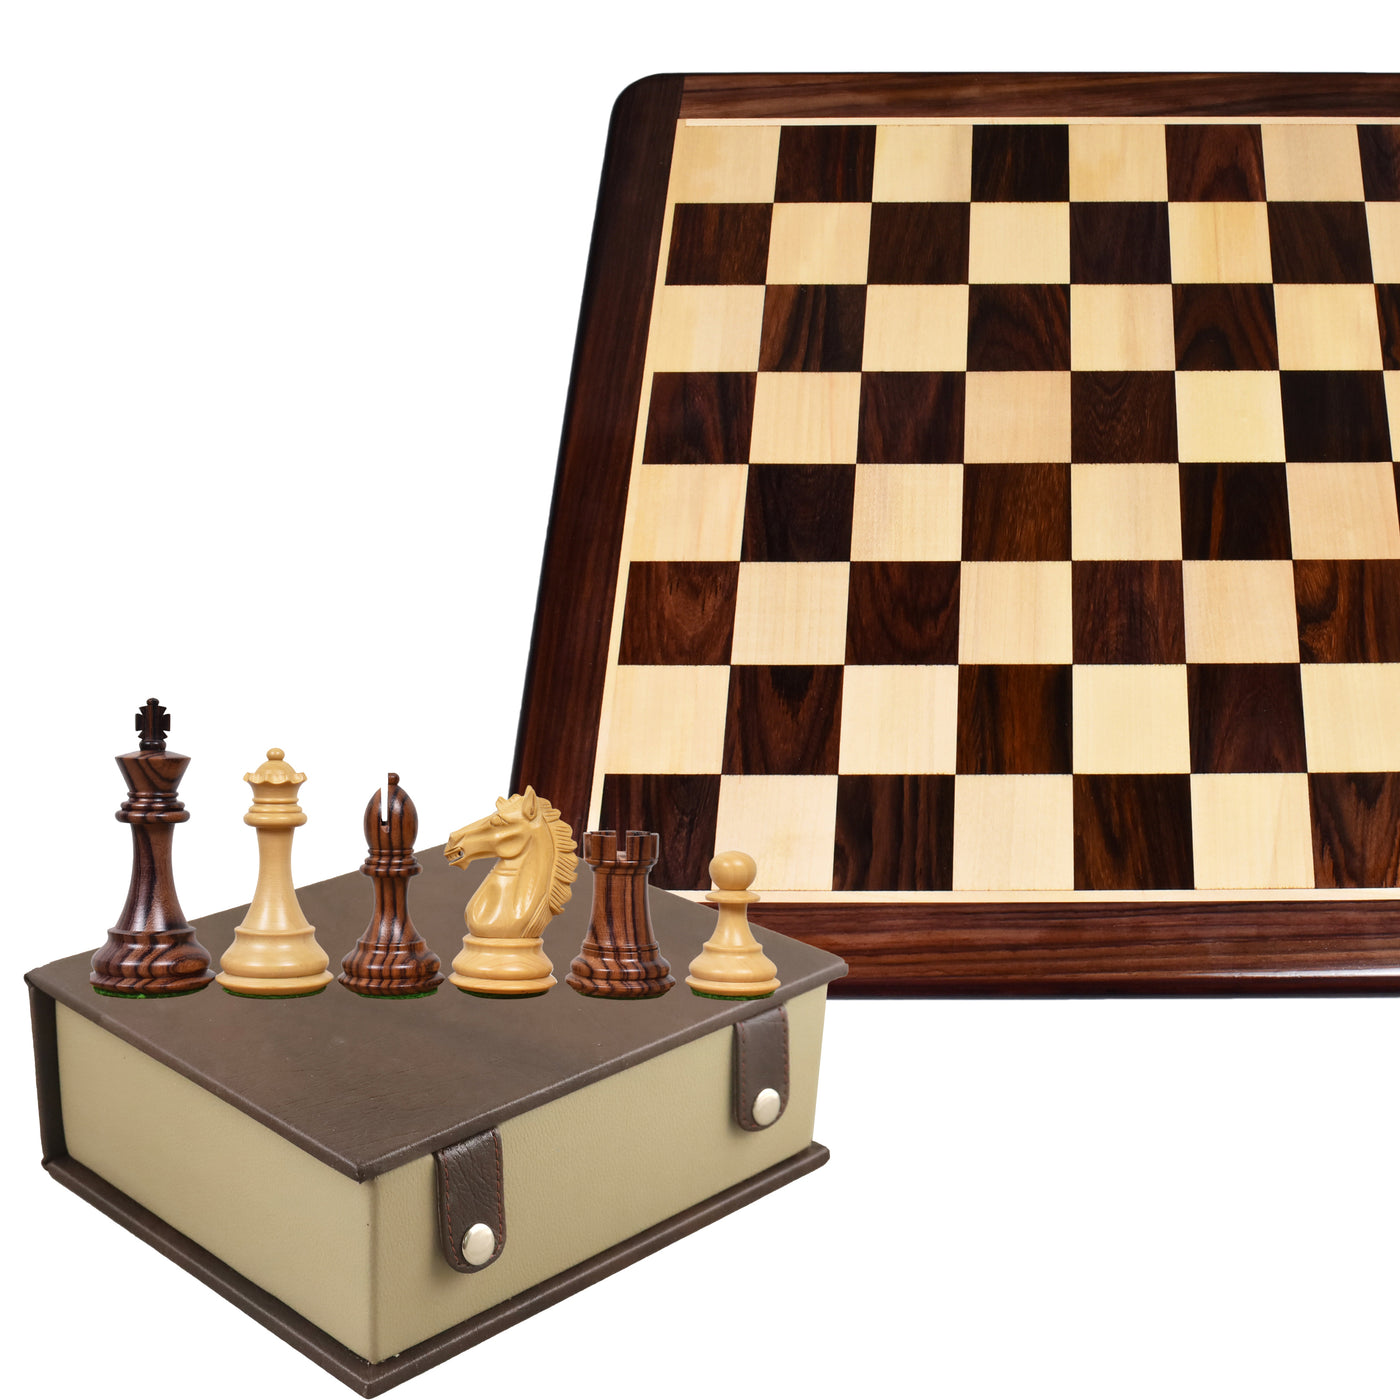 3.9" Exclusive Alban Staunton Rosewood Chess Pieces with 21" Large Flat Chess board Rosewood & Maple Wood and Book Style Storage Box